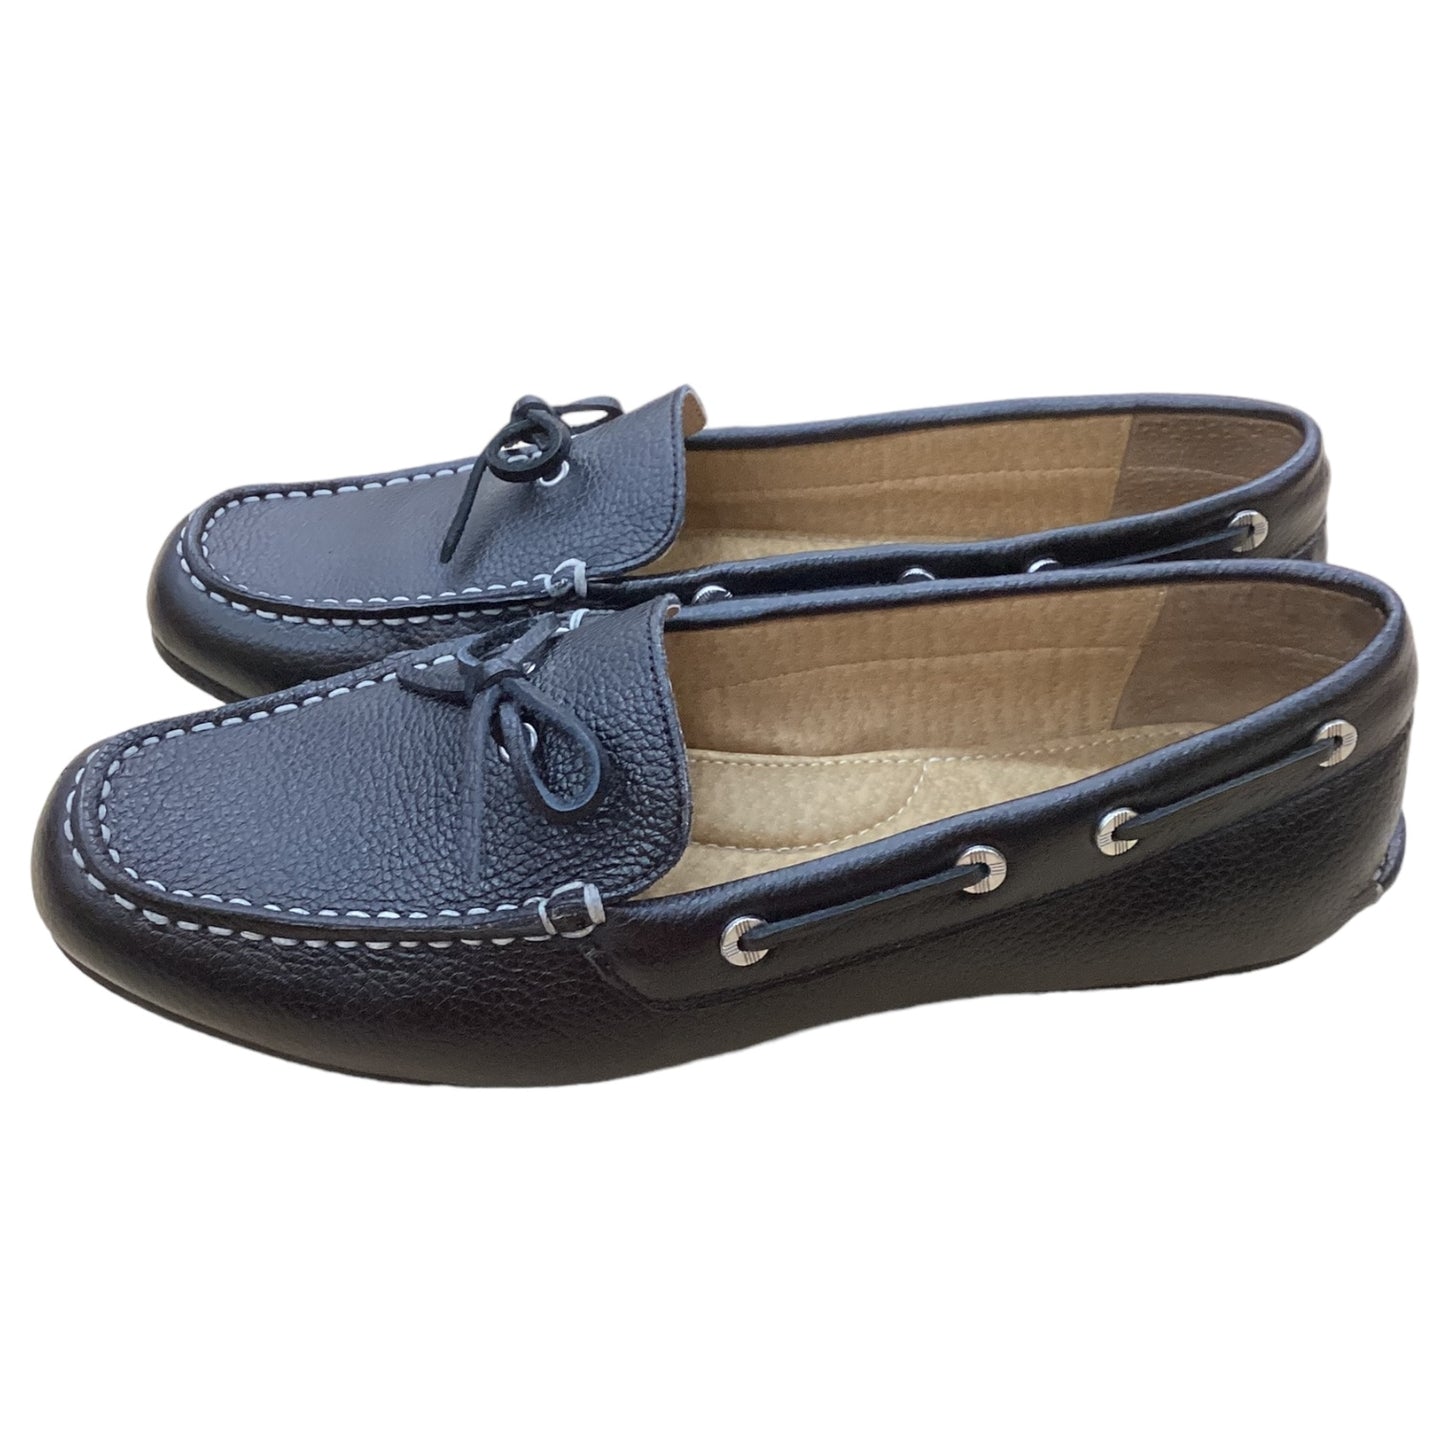 Shoes Flats Loafer Oxford By Lands End  Size: 8.5